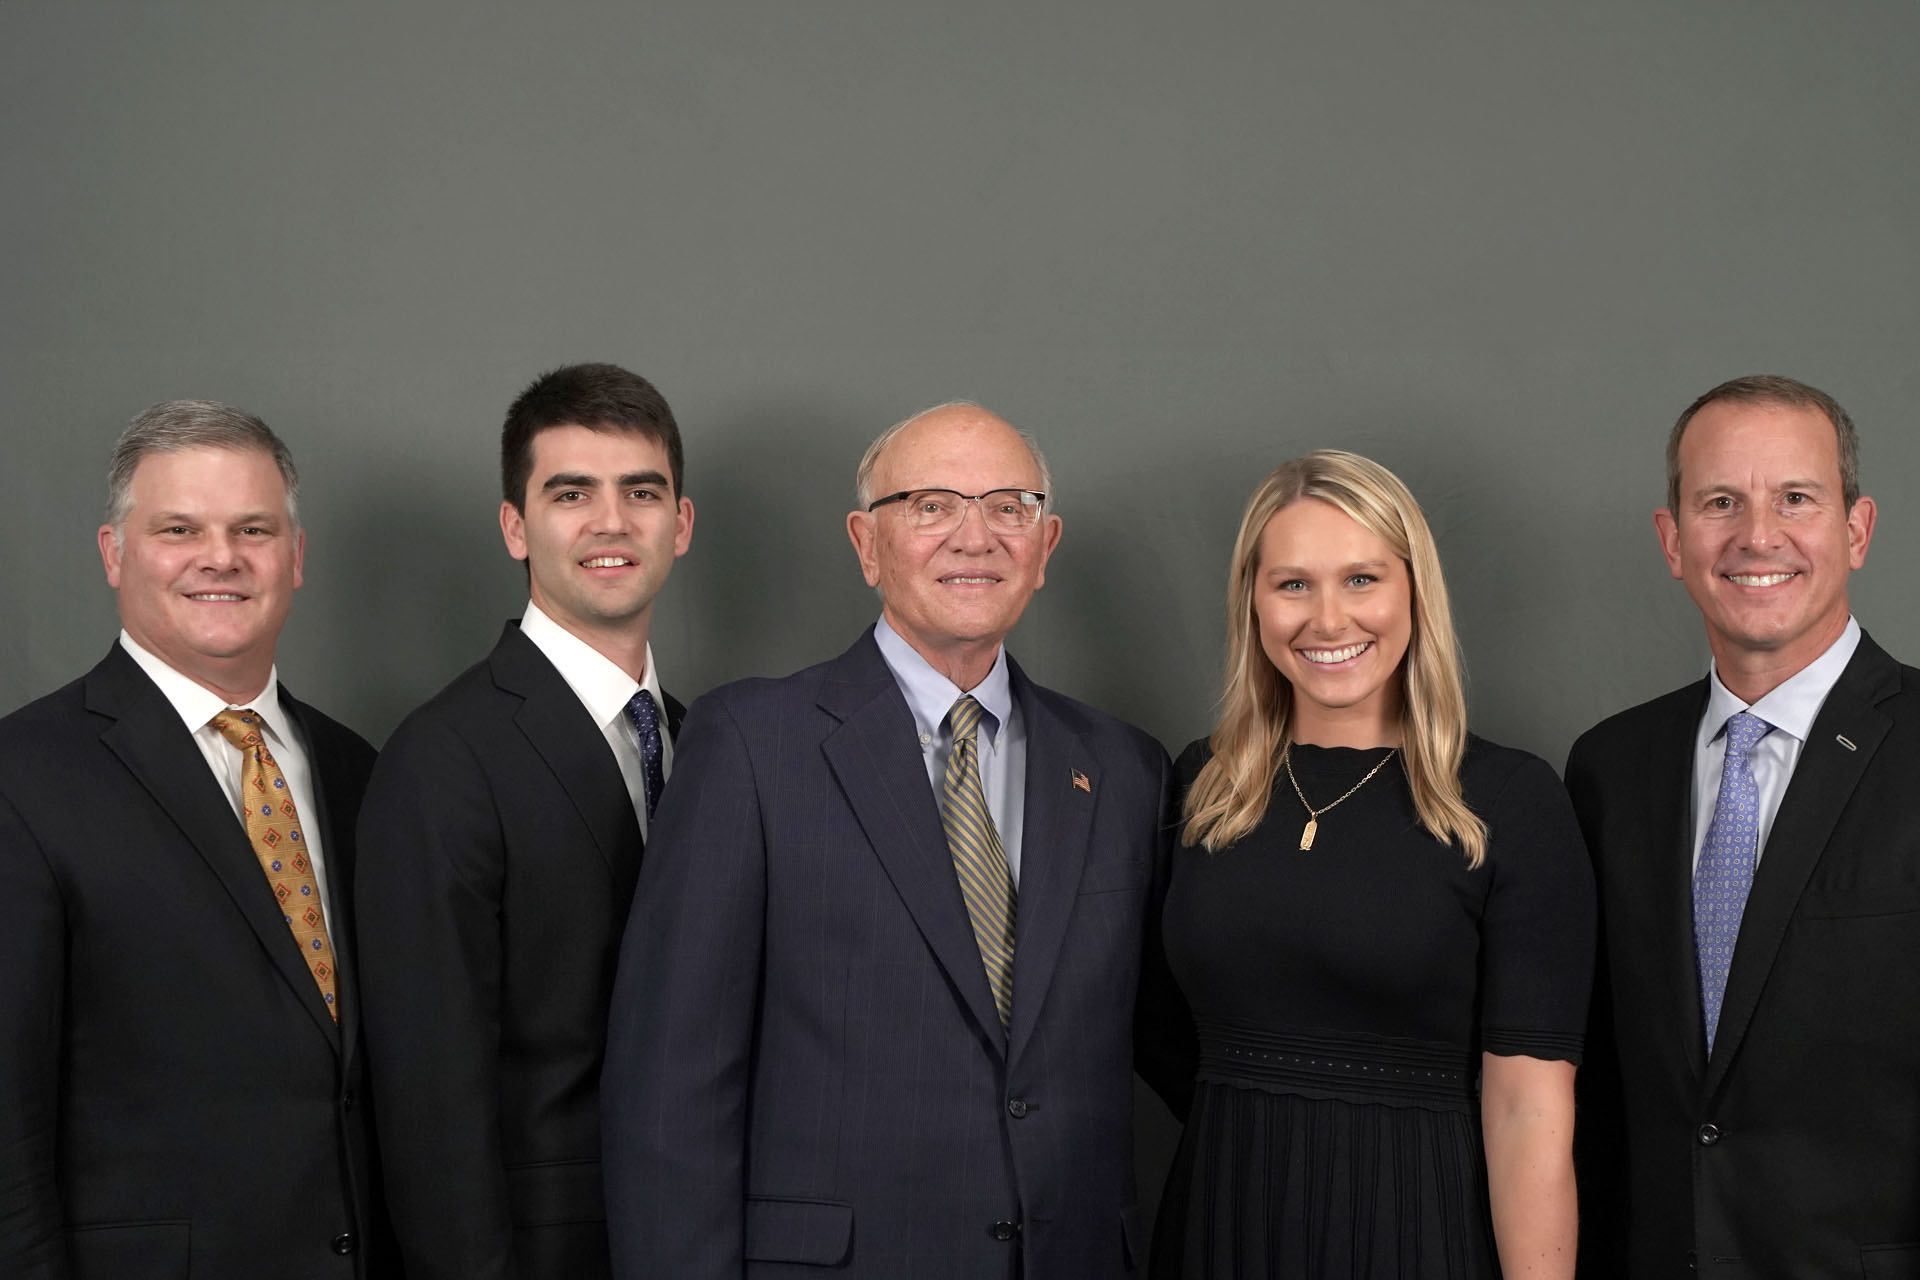 2023 - John J. and Claire Cooke join the Cooke Financial Group